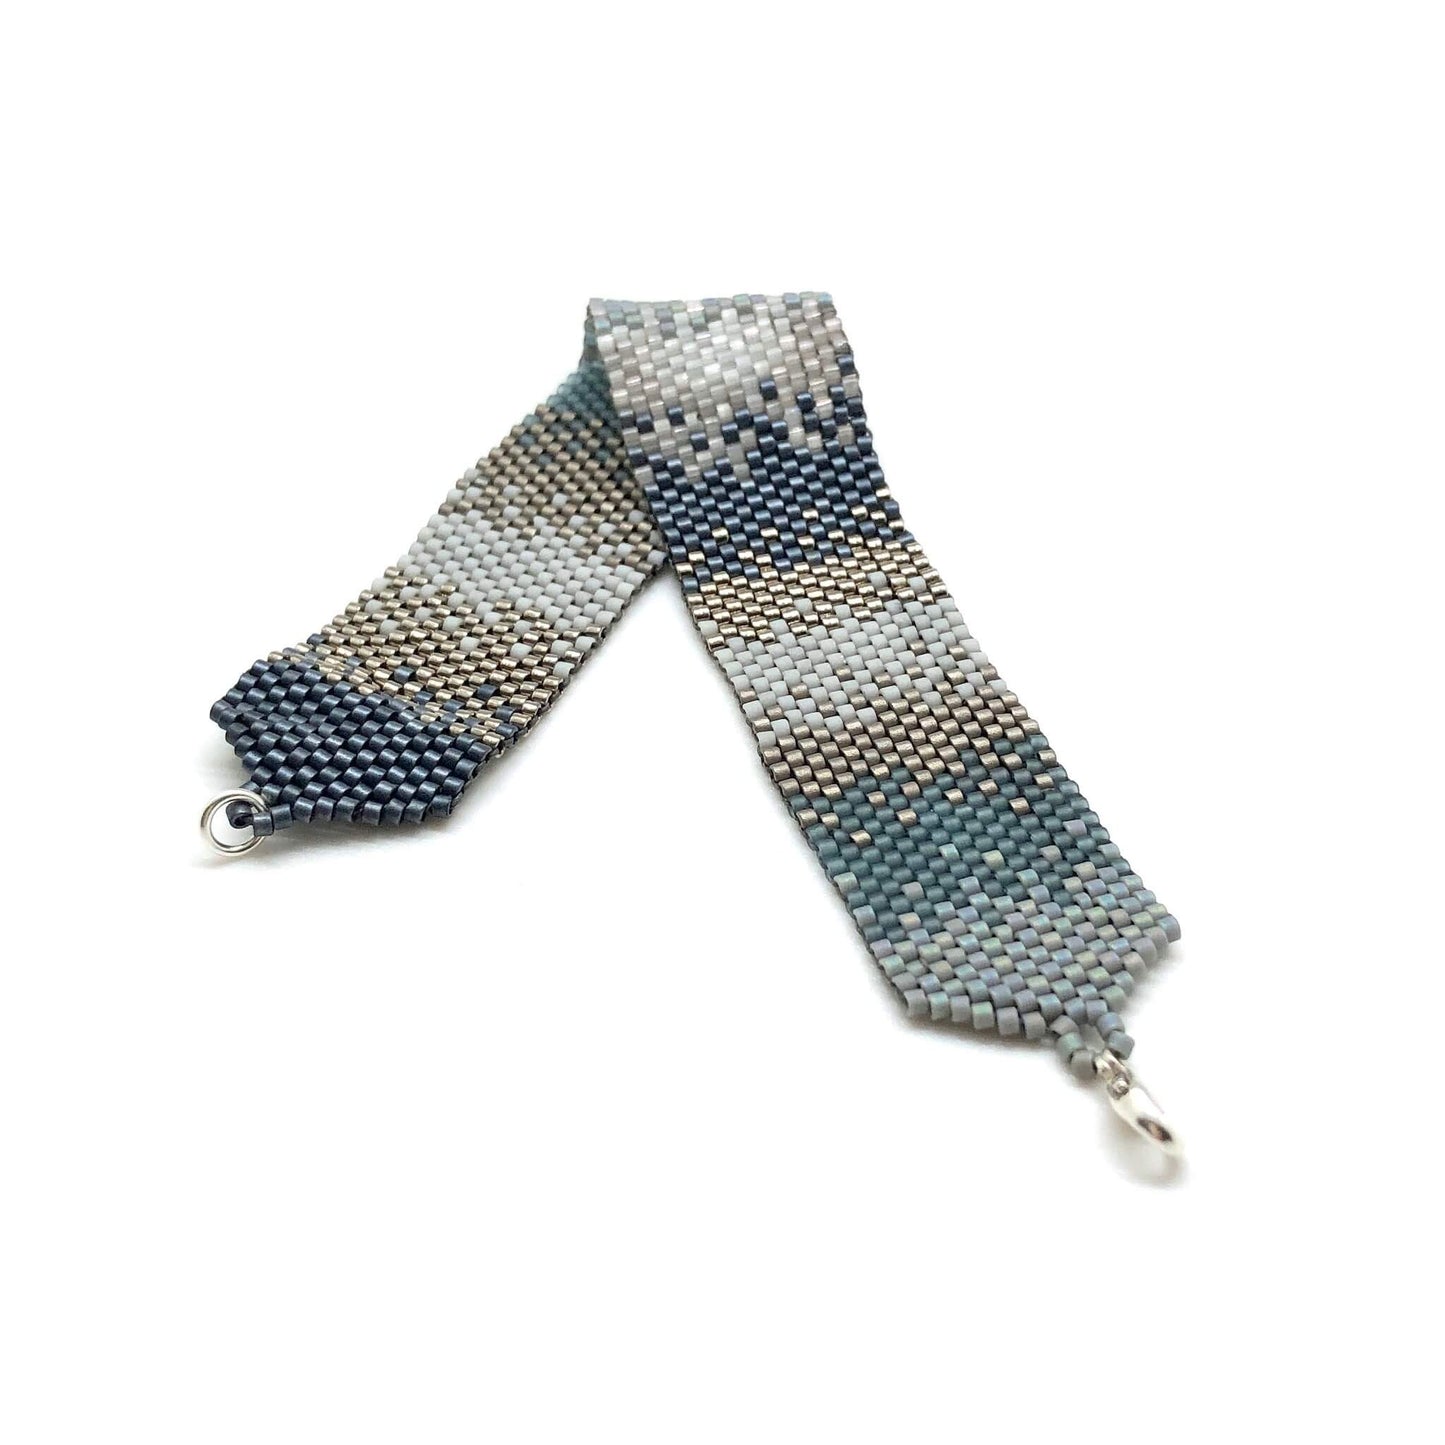 Blue, silver, and grey seed bead peyote stitch ombre bracelet.